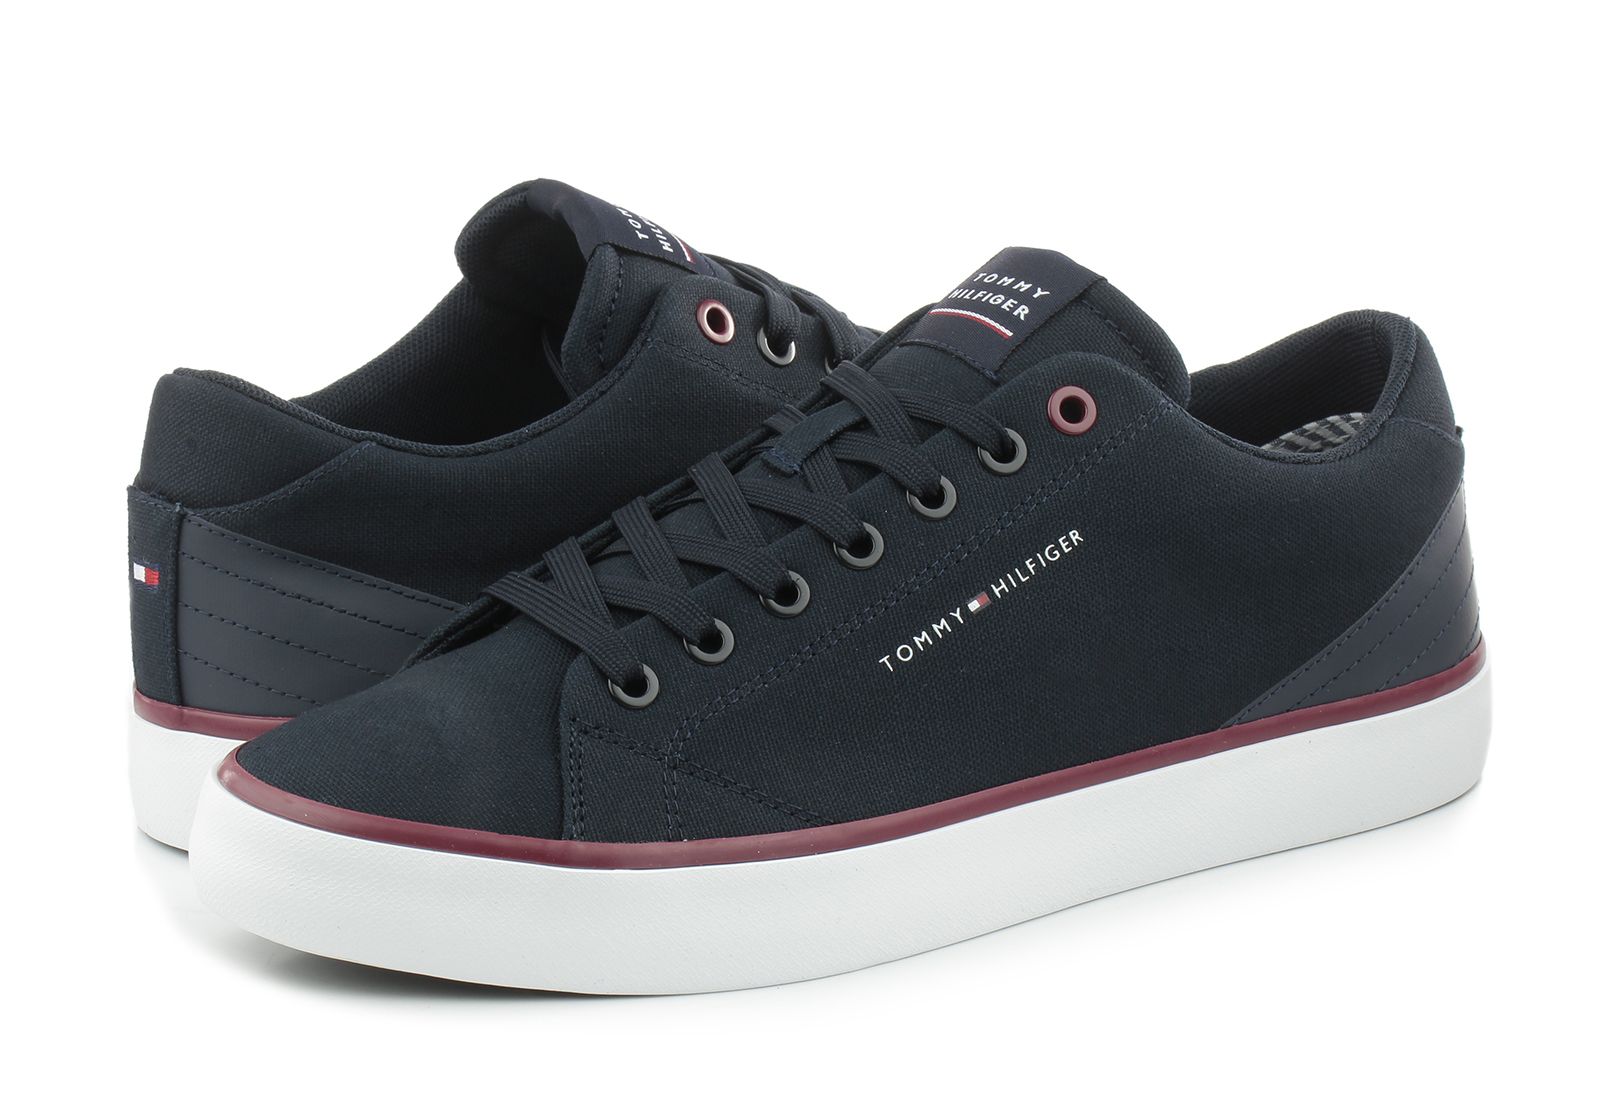 Tommy Hilfiger Trainers - Harlem Core 1D - FM0-4737-DW5 - Online shop for  sneakers, shoes and boots